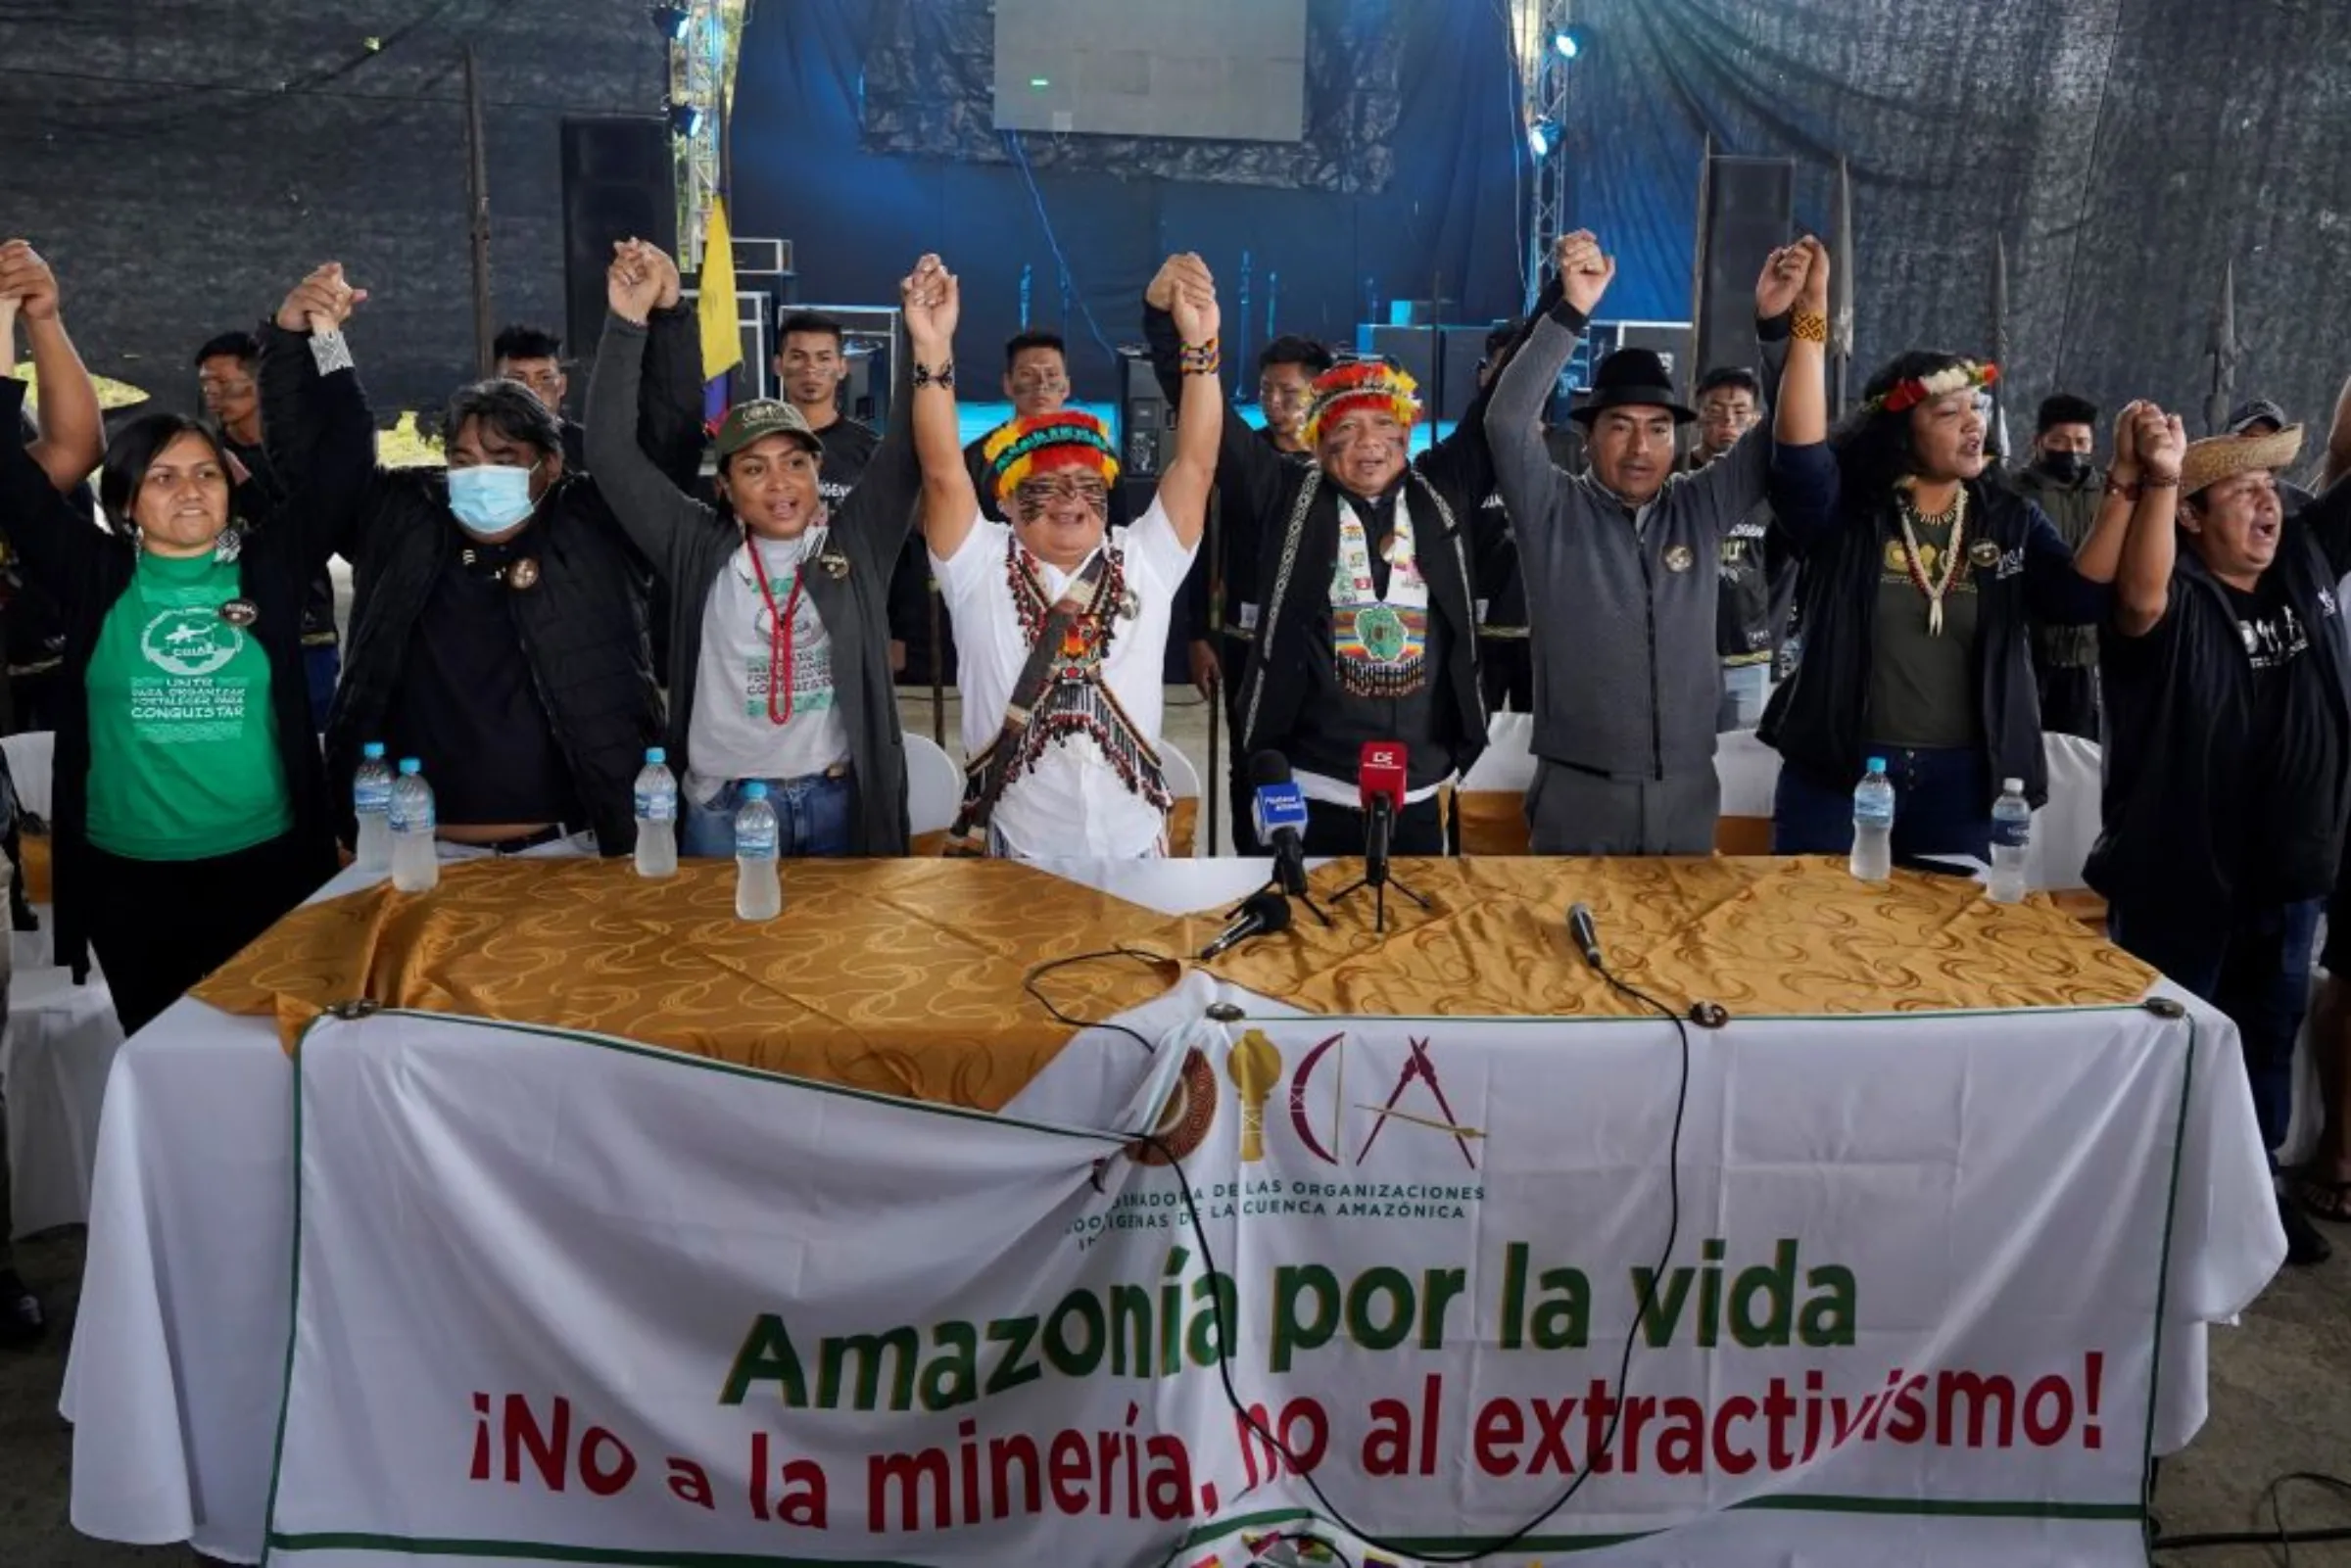 Leaders from indigenous communities in the Amazon basin gesture at a news conference, in Union Base, Ecuador March 15, 2022